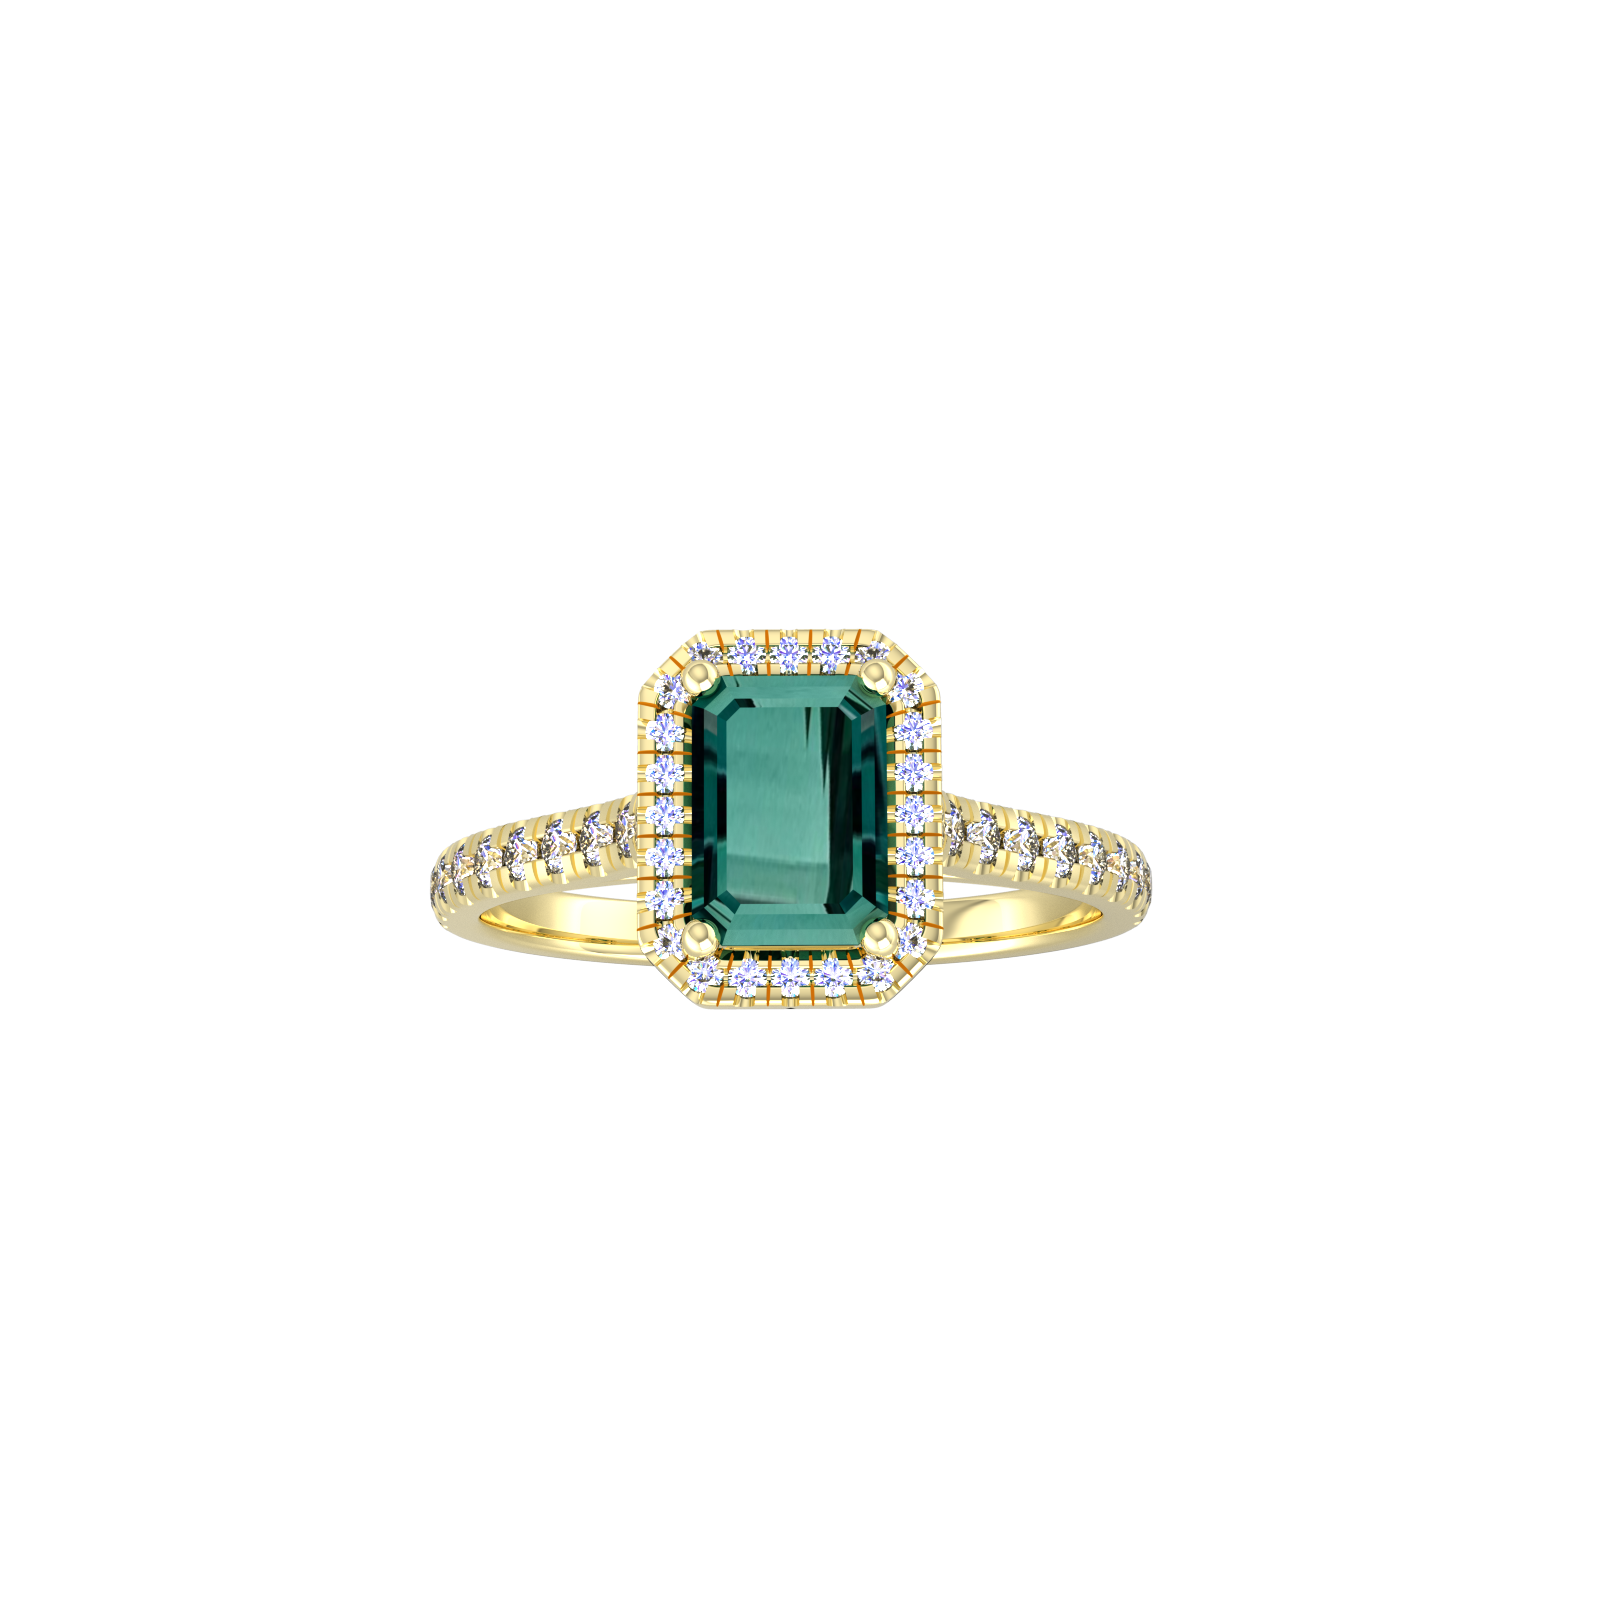 9ct Yellow Gold Green Tourmaline & Diamond Halo Ring with Diamond Shoulders - Ring Size D